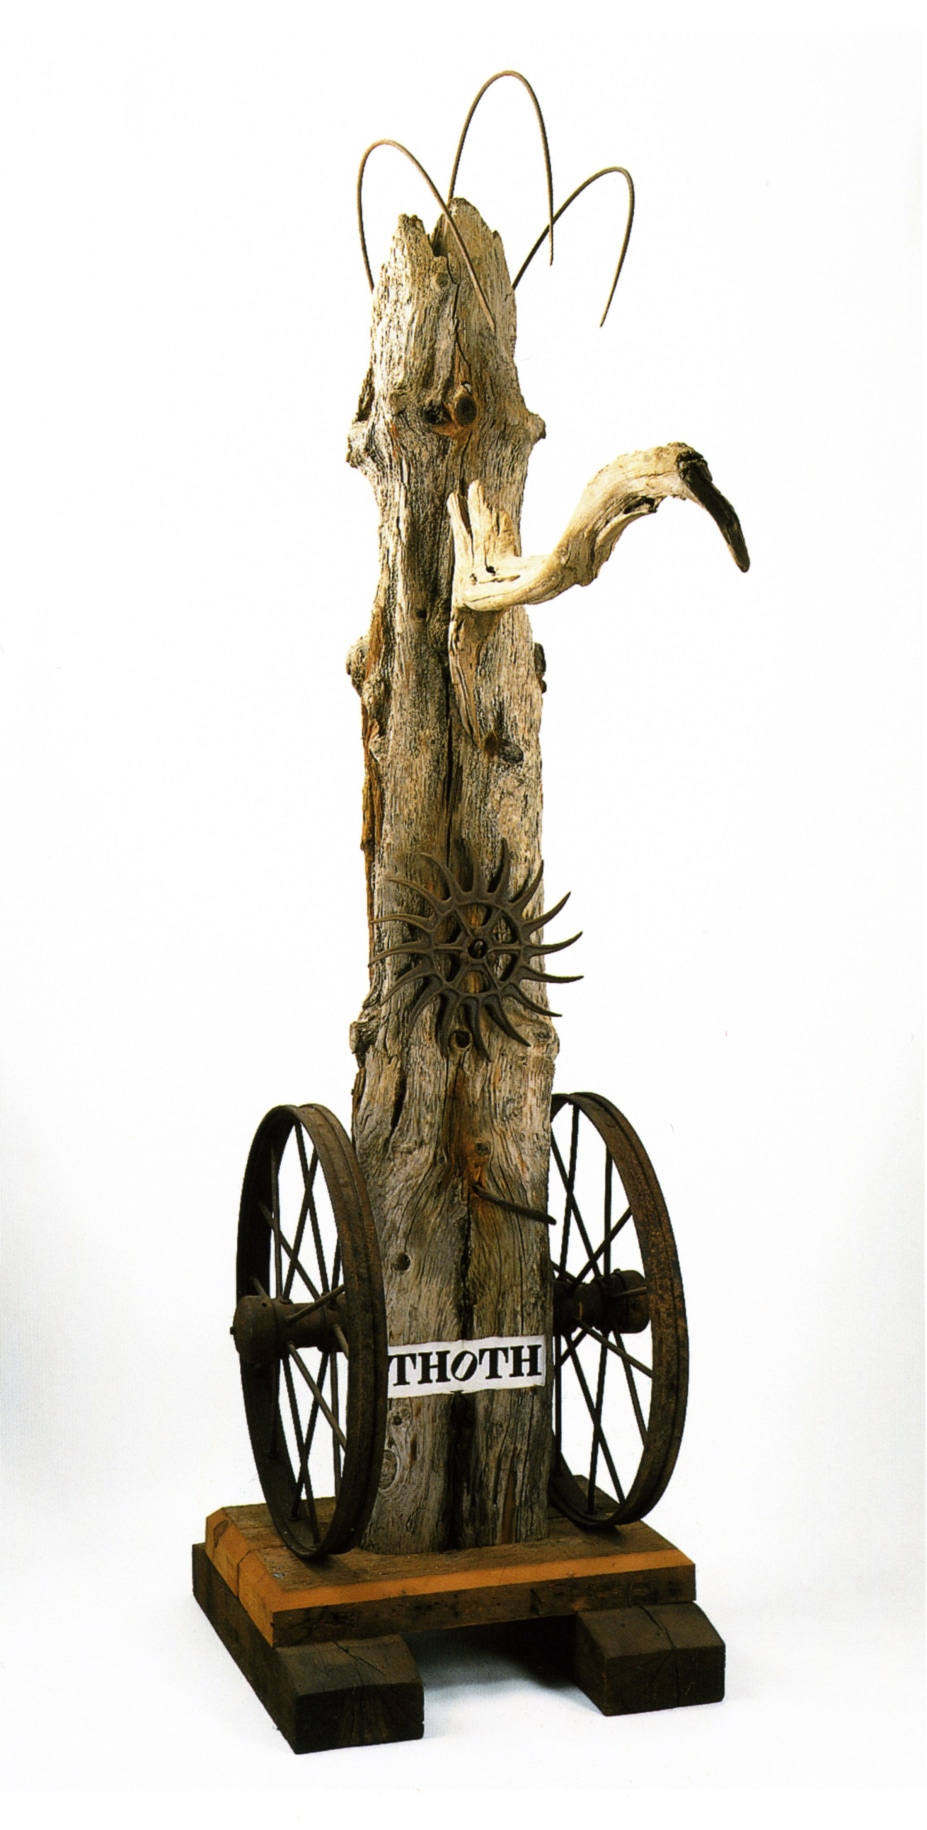 A 130 1/2 by 71 by 38 1/2 inch weathered wood sculpture on a wooden base. The sculpture's title, &quot;Thoth,&quot; is painted in black stenciled letters on a white ground across the front of the sculpture, near the base. An iron wheel has been attached to the sides of the sculpture to the left and right of the title. A long metal nail protrudes from the sculpture above the title, and above this is an old rotary tiller wheel. A piece of driftwood, resembling a long beak, has been attached to the front of the work near the top. to